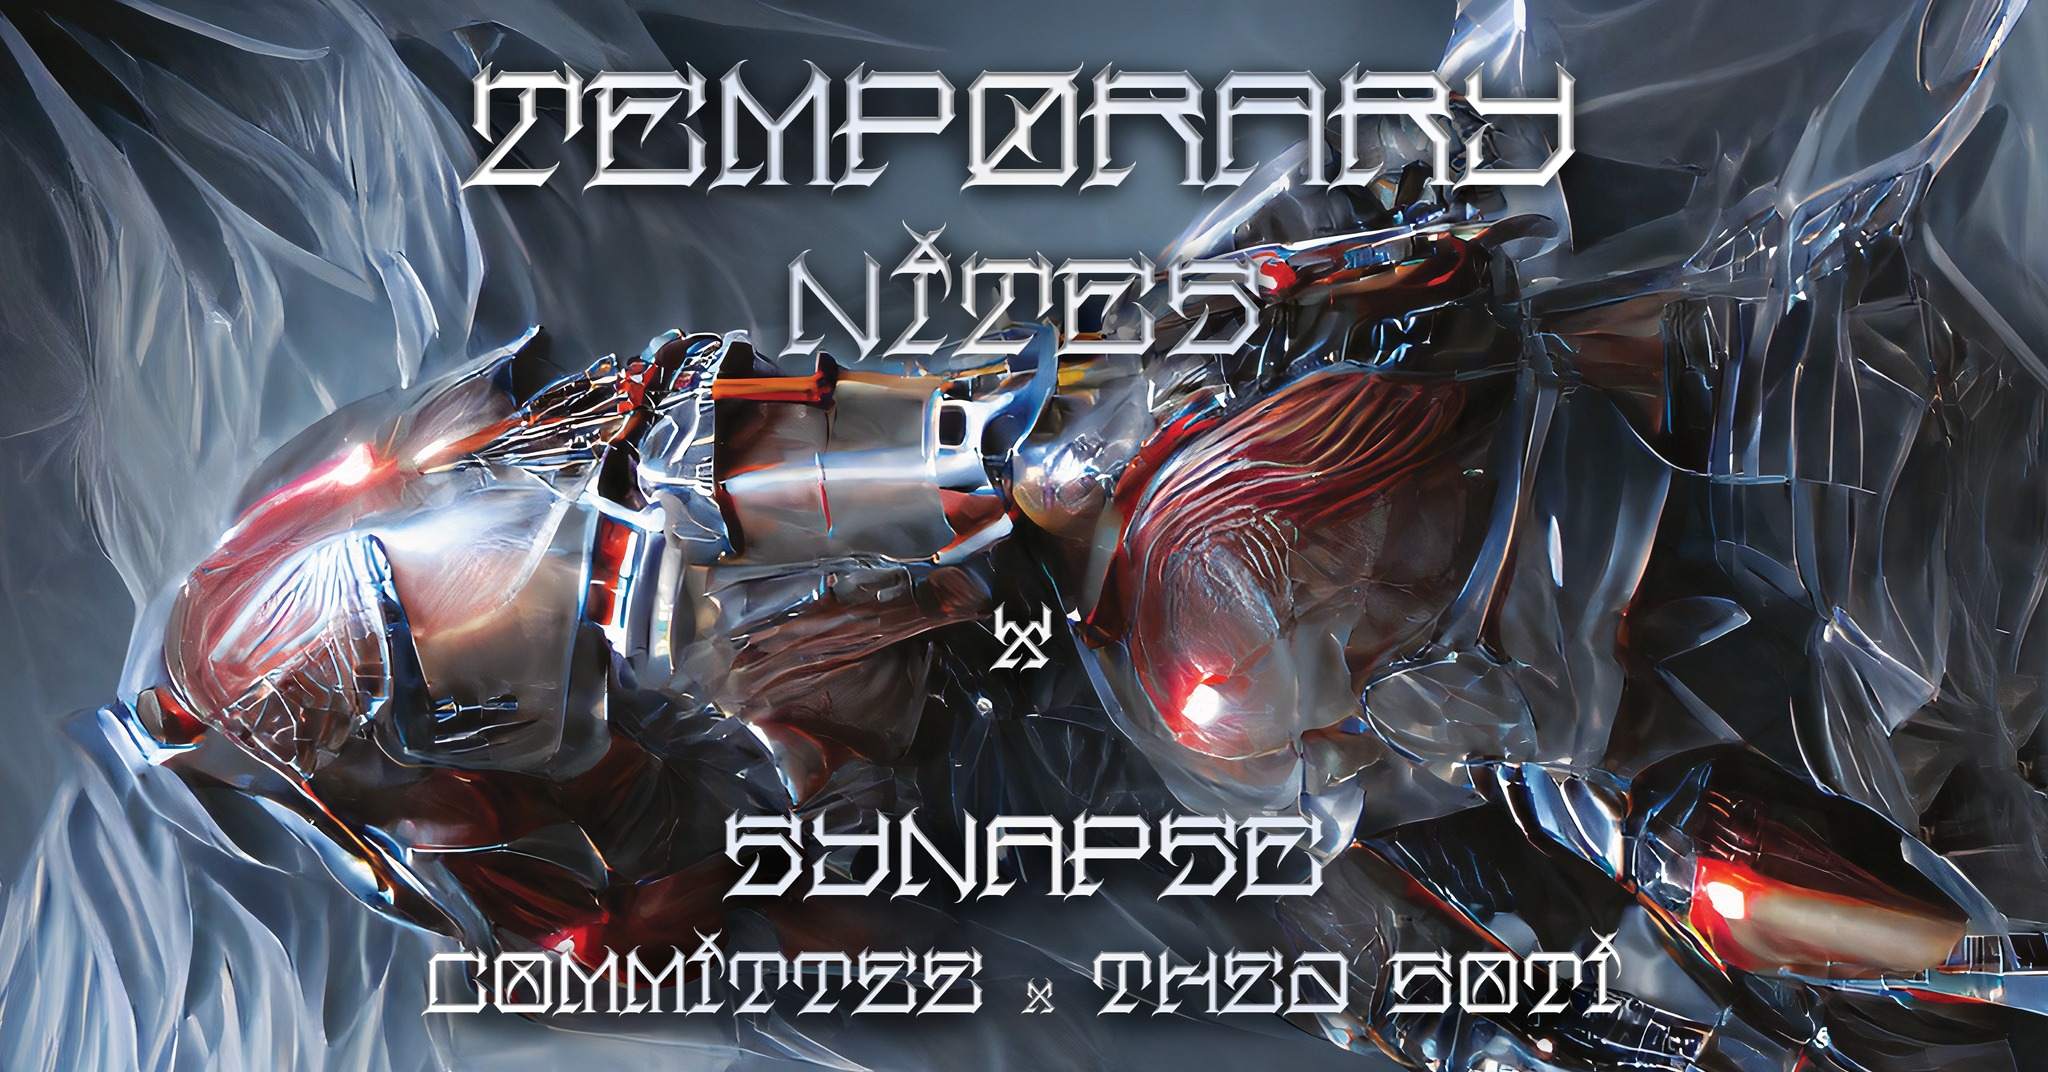 Synapse x Temporary Nites with Committee x Thea Soti (Live) - フライヤー表